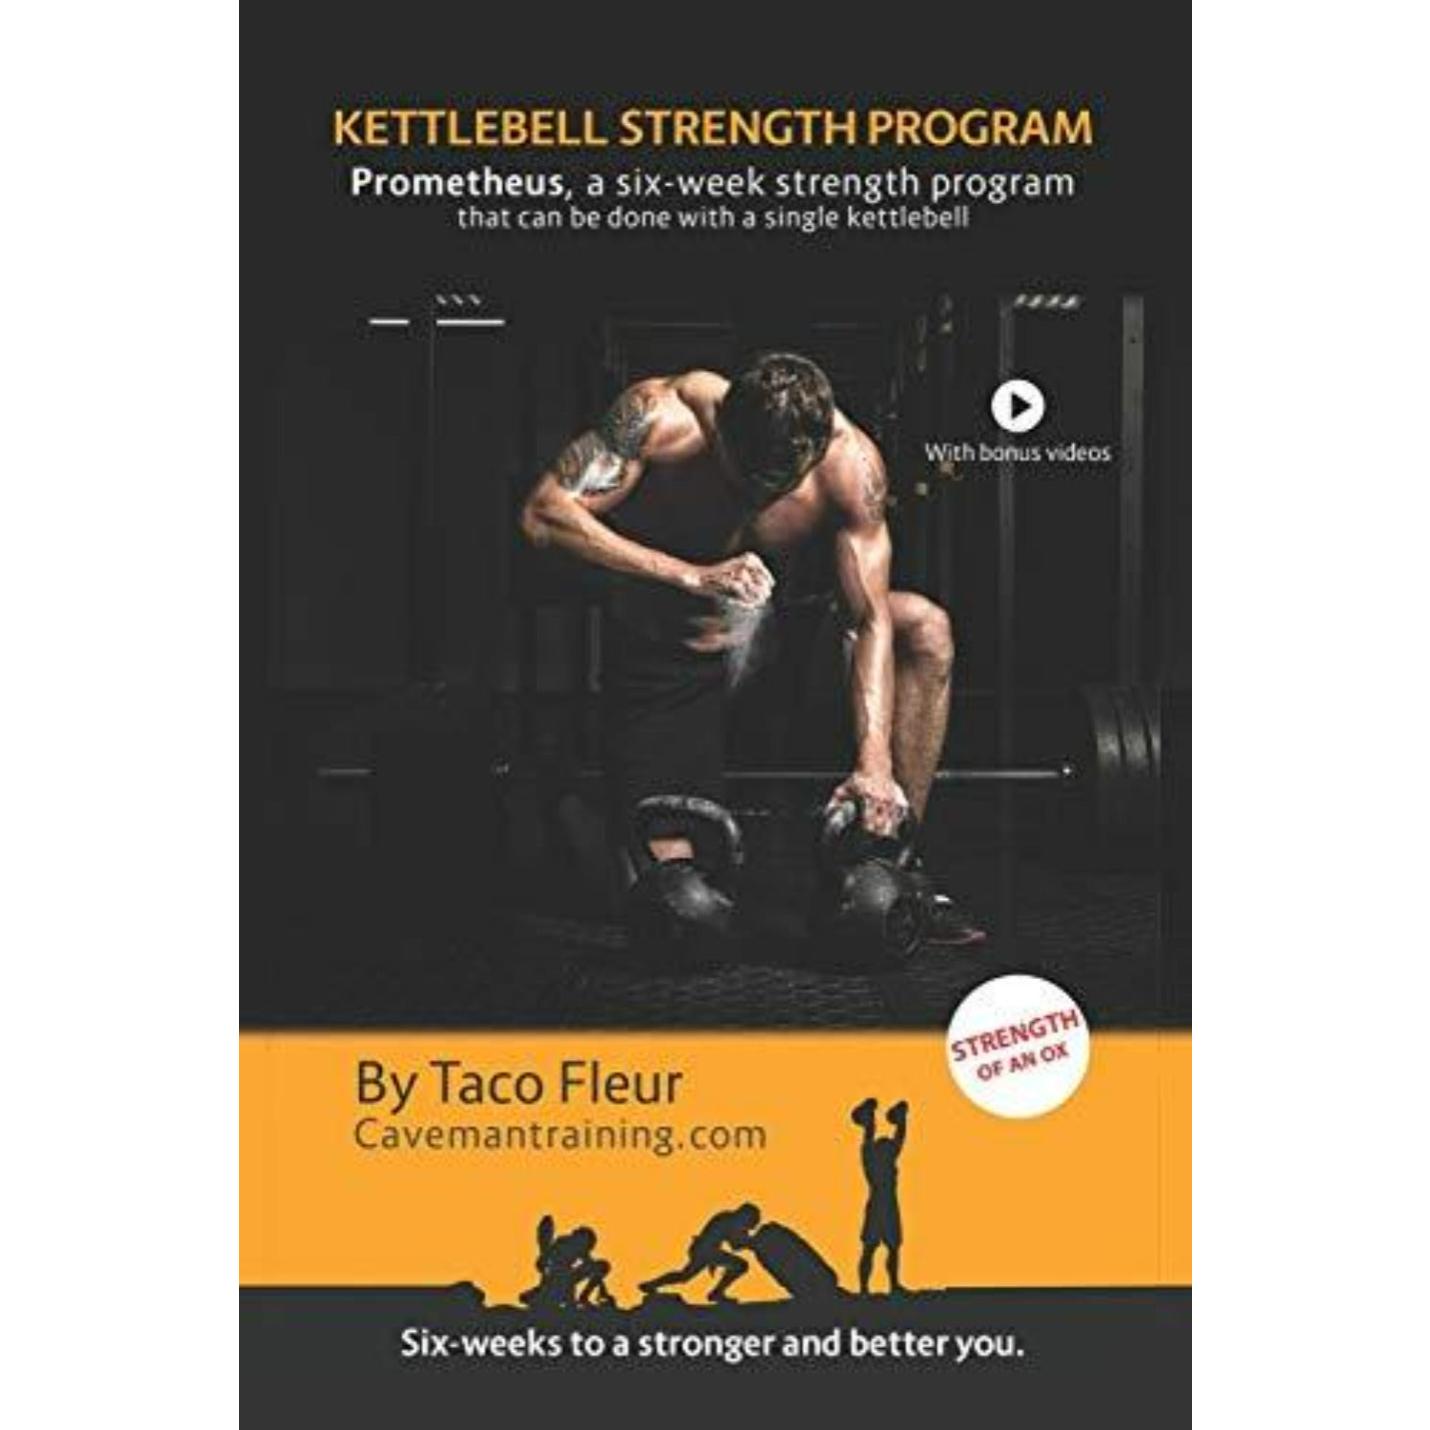 Kettlebell Strength Program Prometheus: A six-week strength program that can be done with a single kettlebell: 10 - kettlebell oefeningen - happygetfit.com